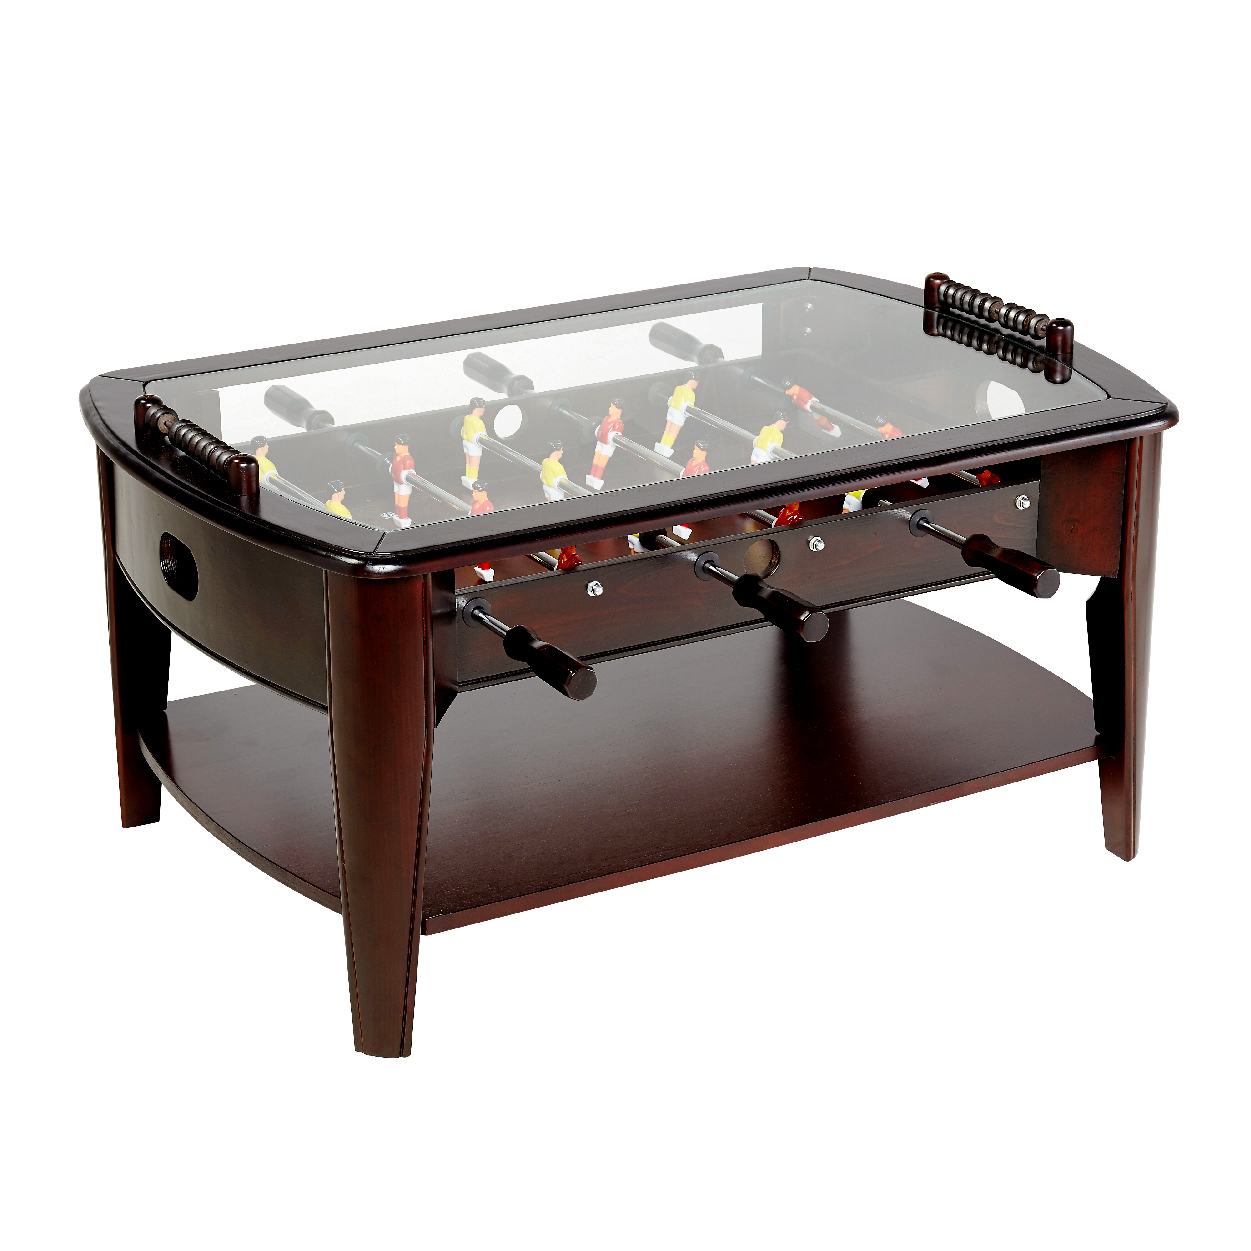 42" Foosball Coffee Table Tempered Glass Game Room or Living Room New 